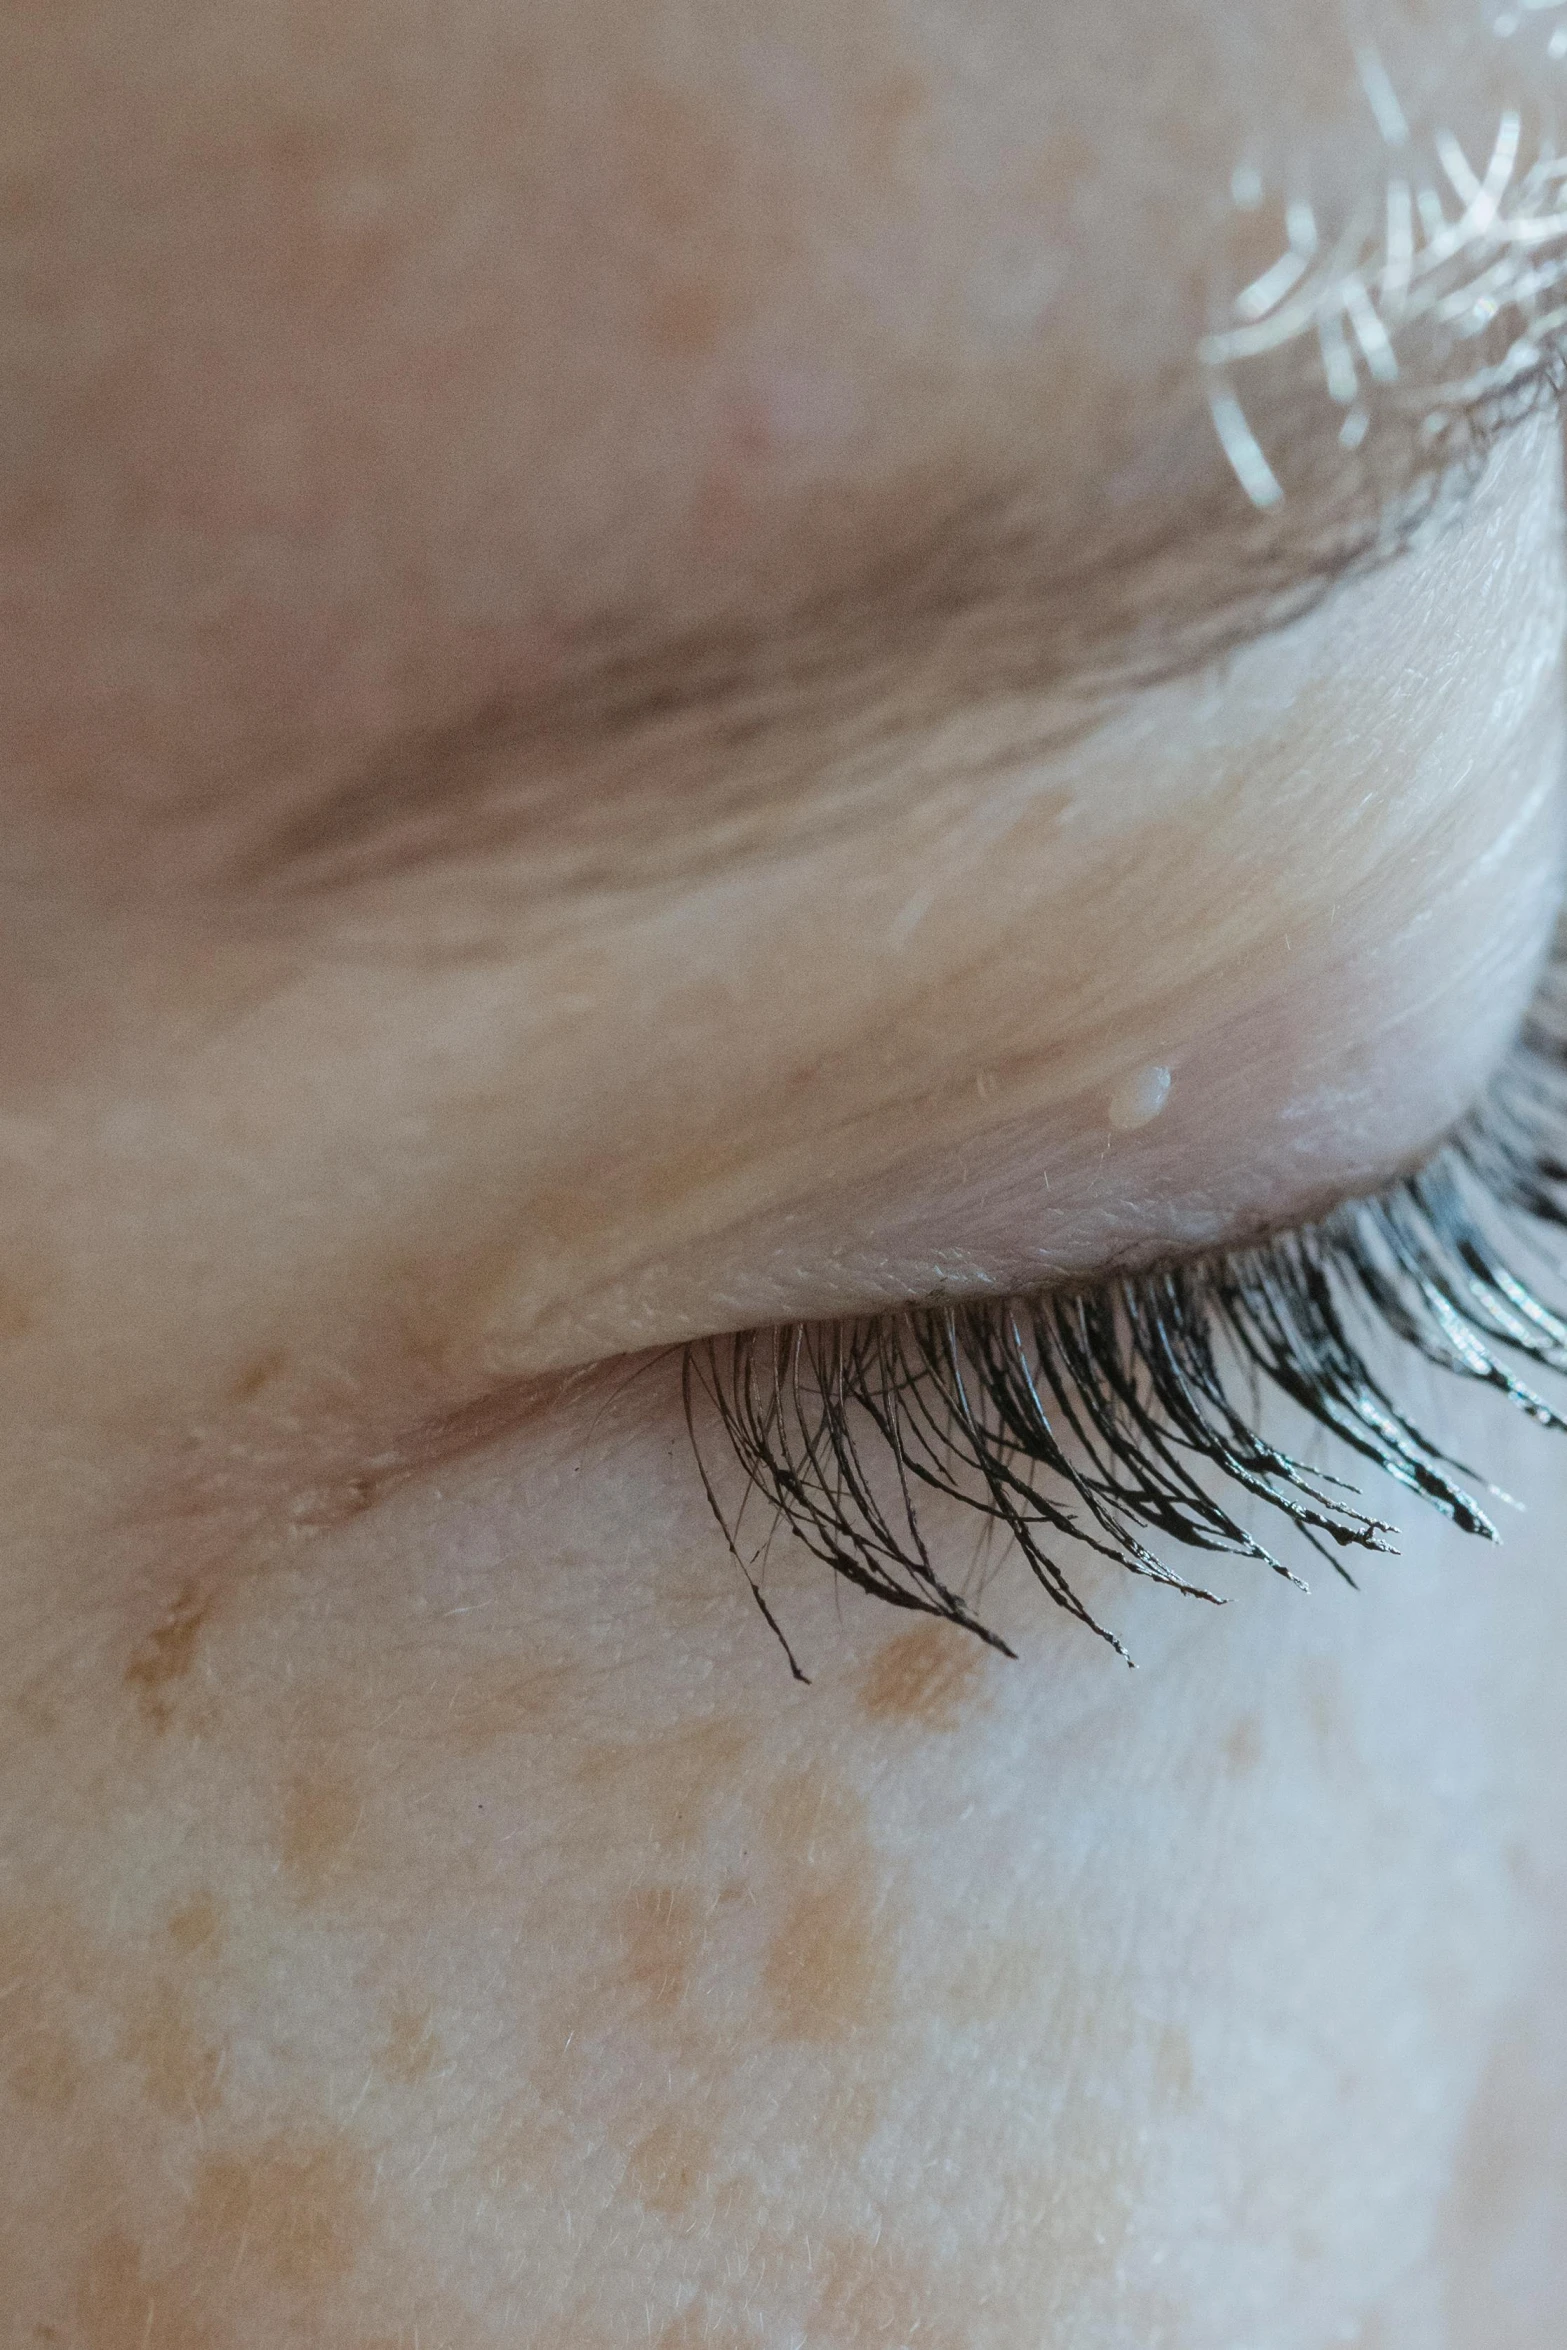 a close up of a person's eye with long eyelashes, a stipple, noticeable tear on the cheek, shy looking down, splash image, sideview